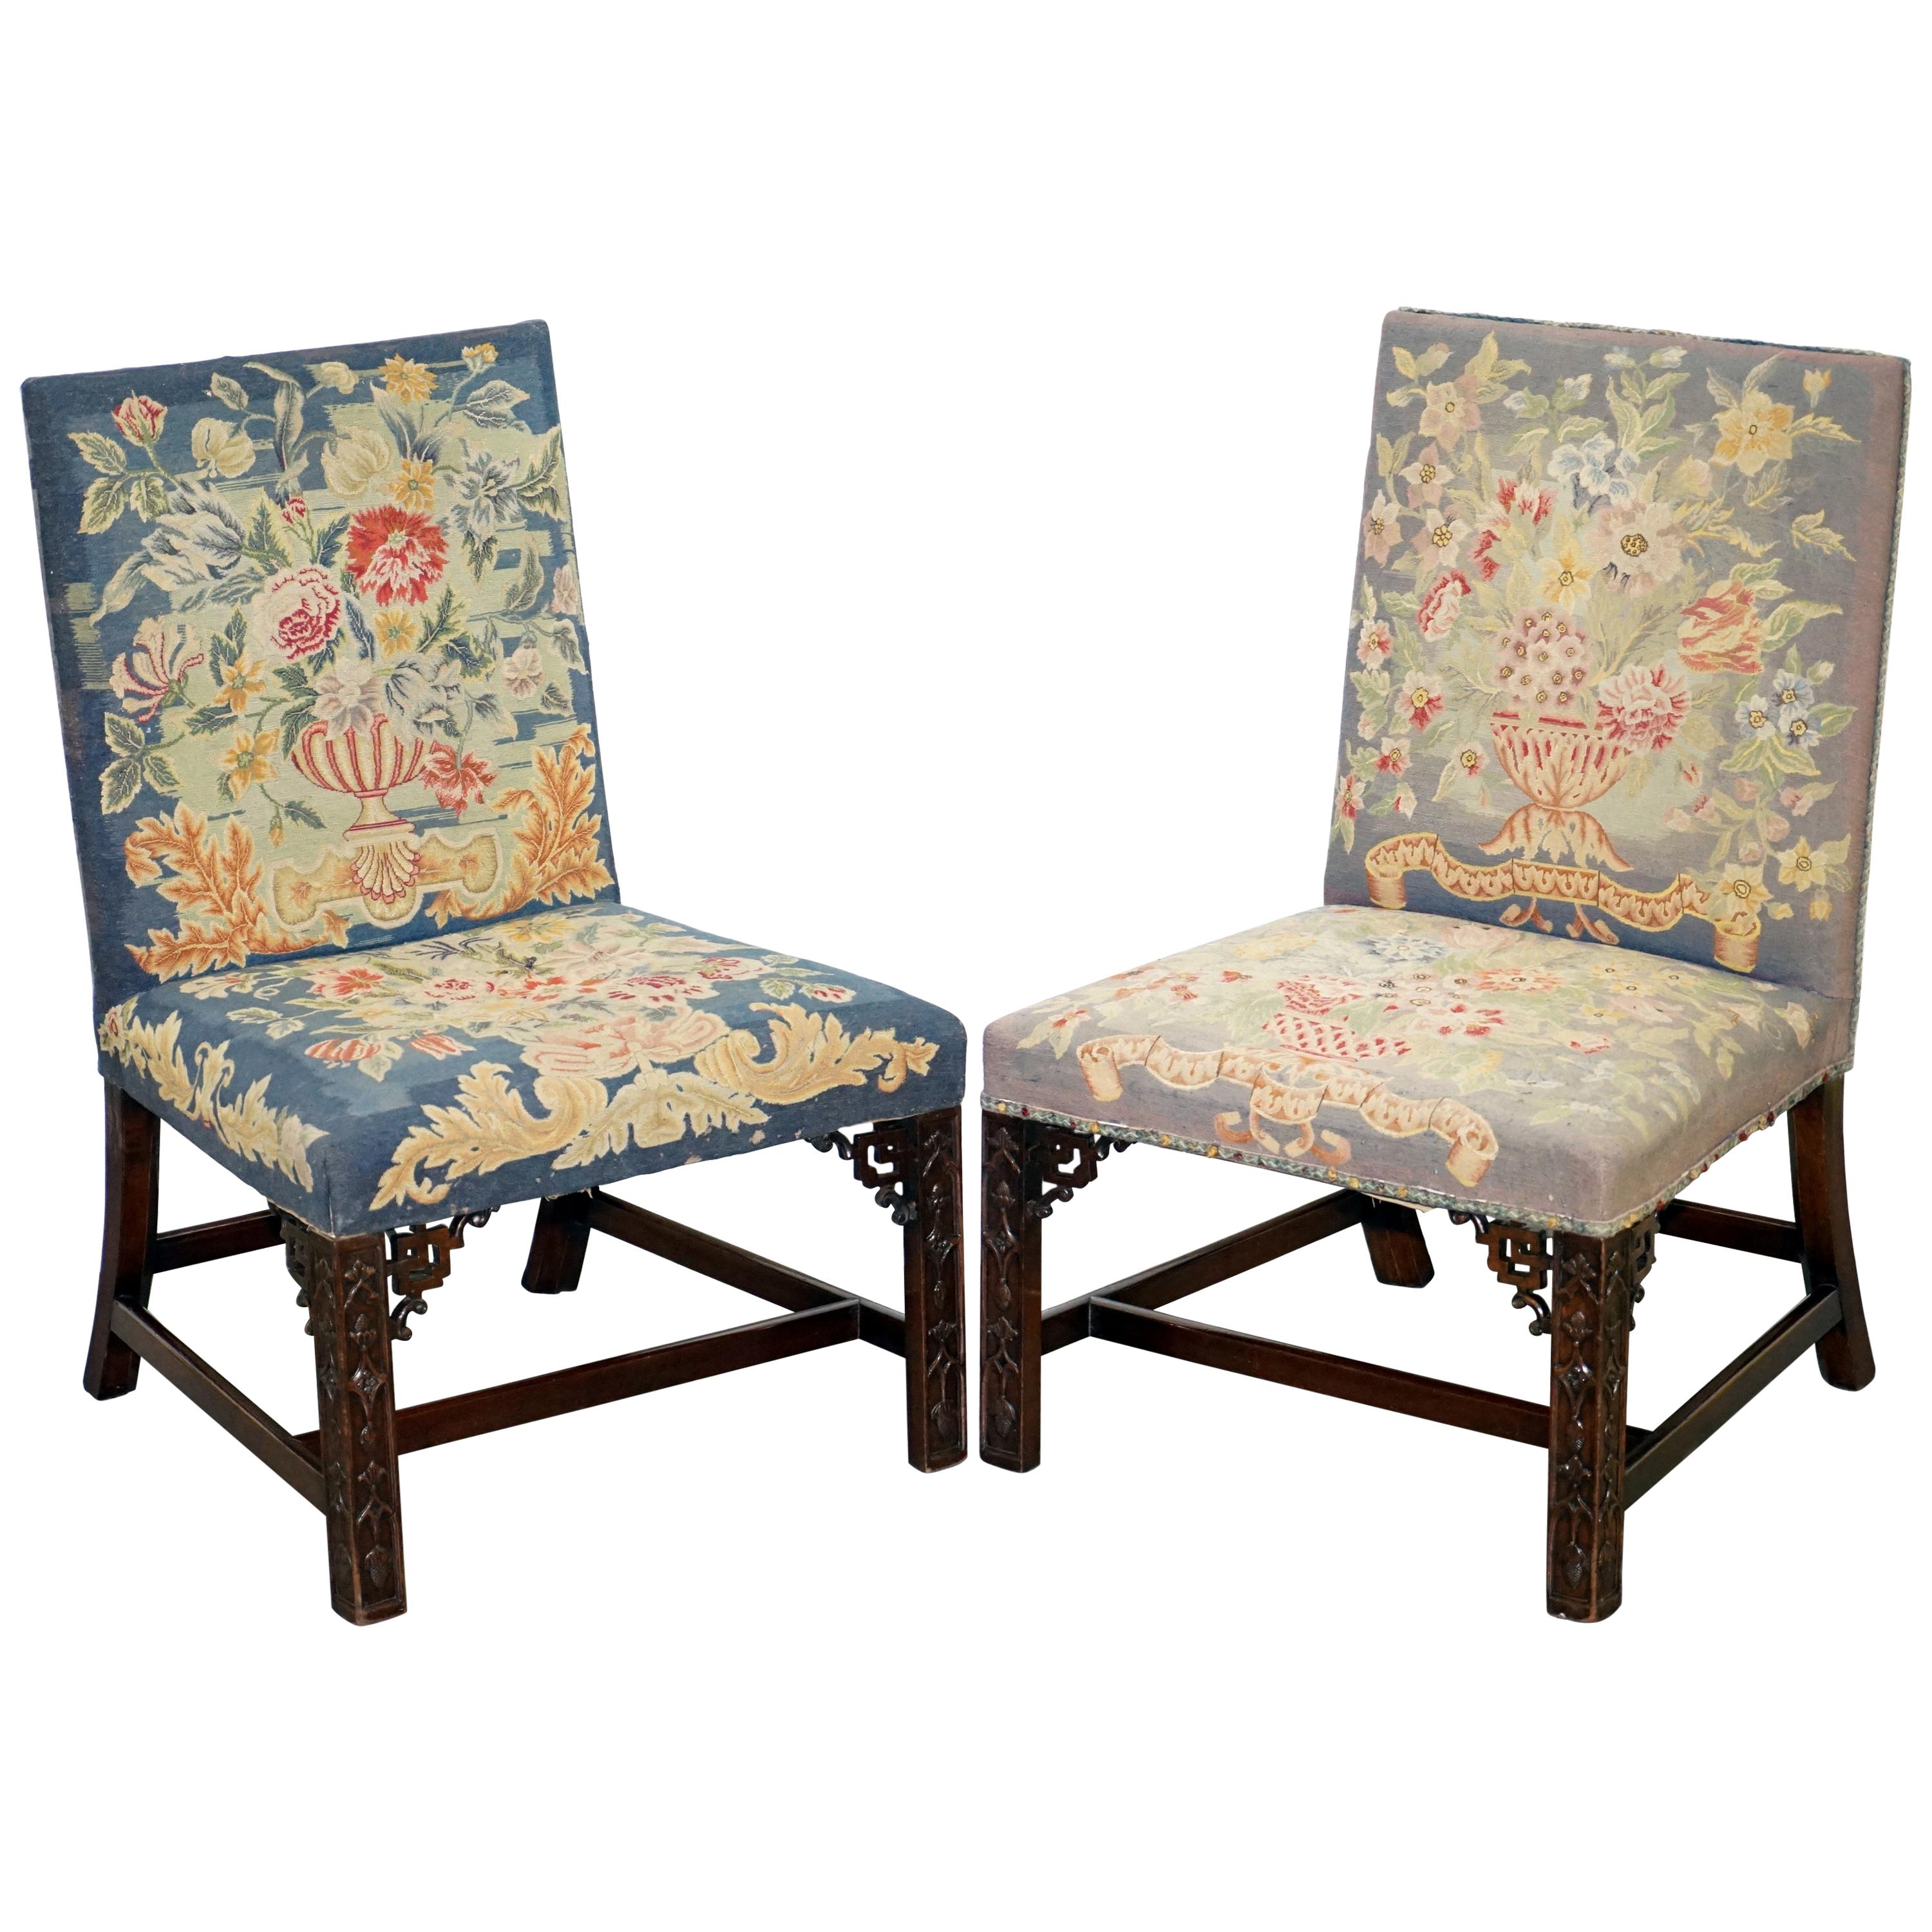 Rare Pair of Thomas Chippendale Period 1760 Embroidered Chairs Ornately Carved For Sale